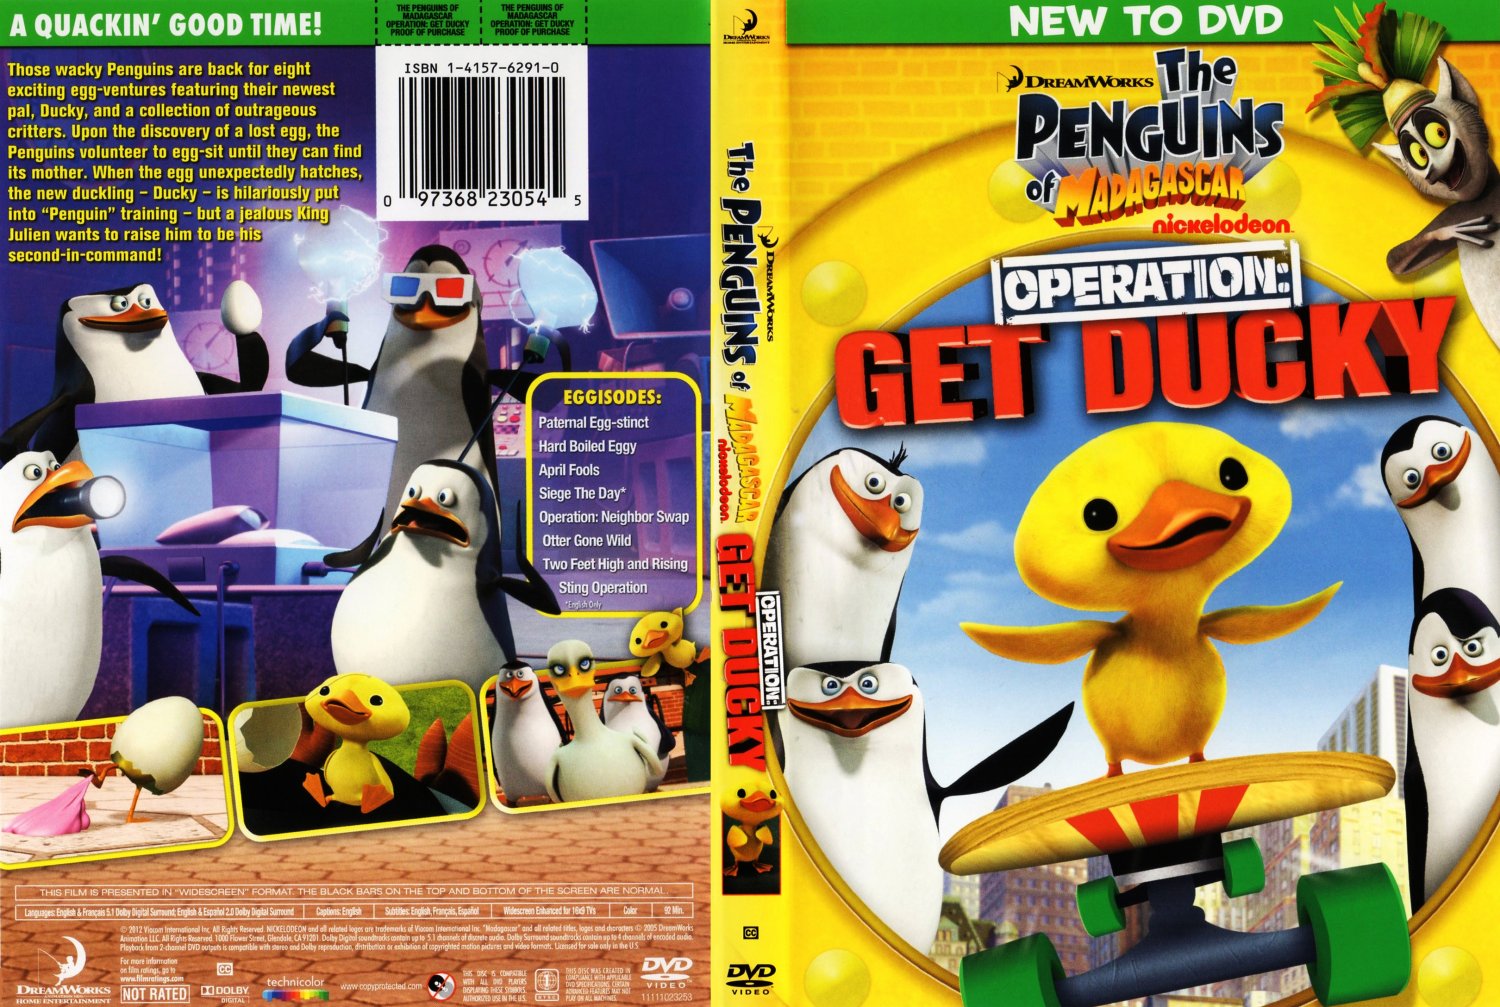 The Penguins of Madagascar Operation Get Ducky - Movie DVD Scanned.